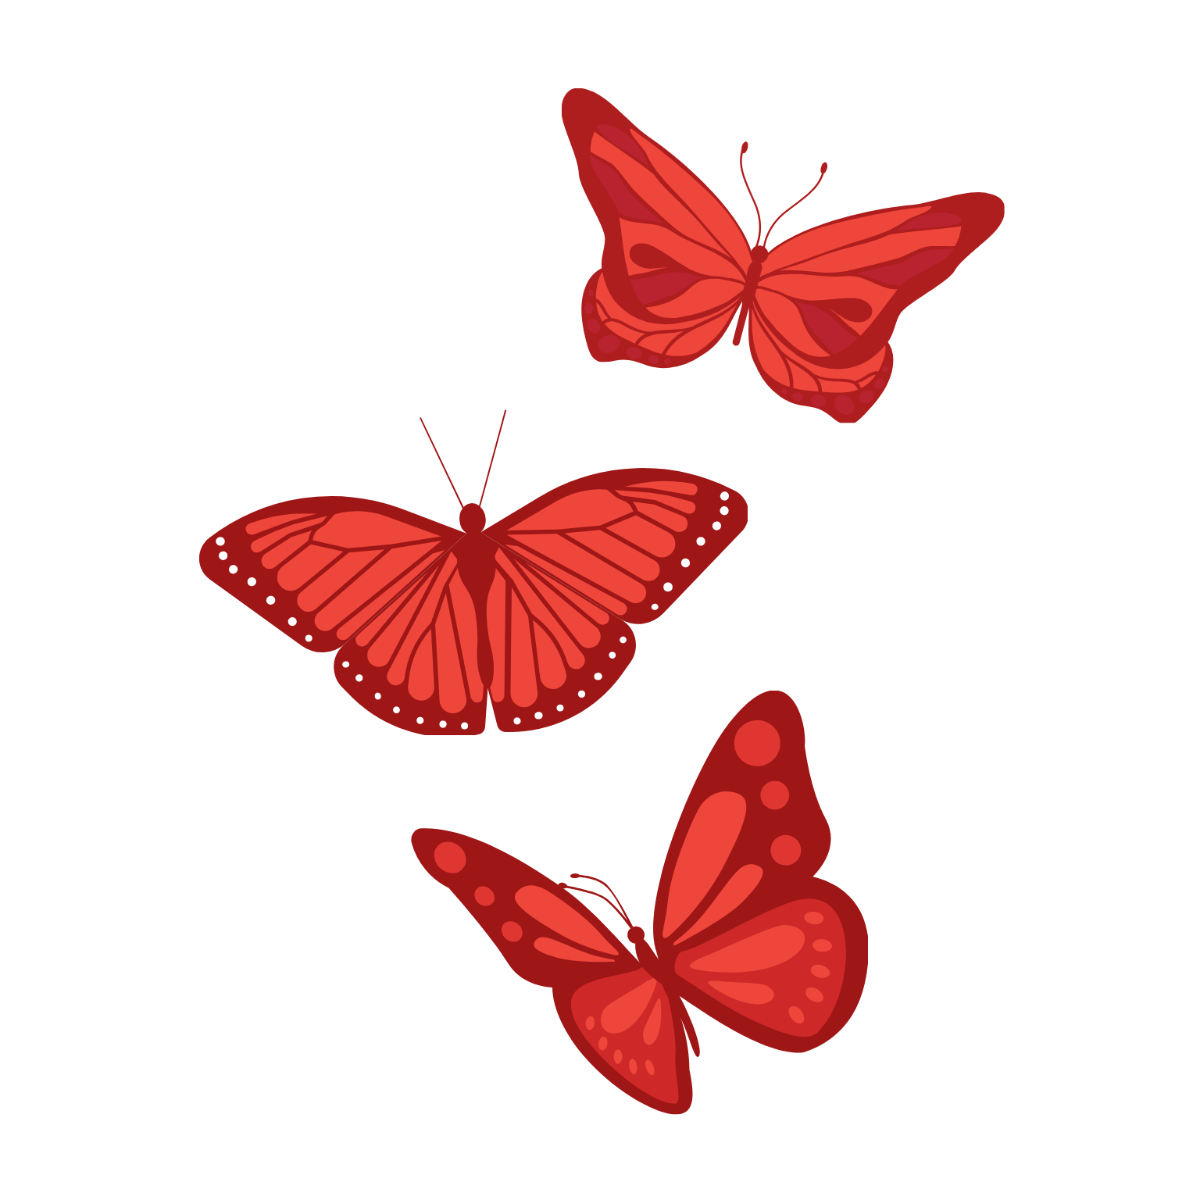 Free butterfly vector